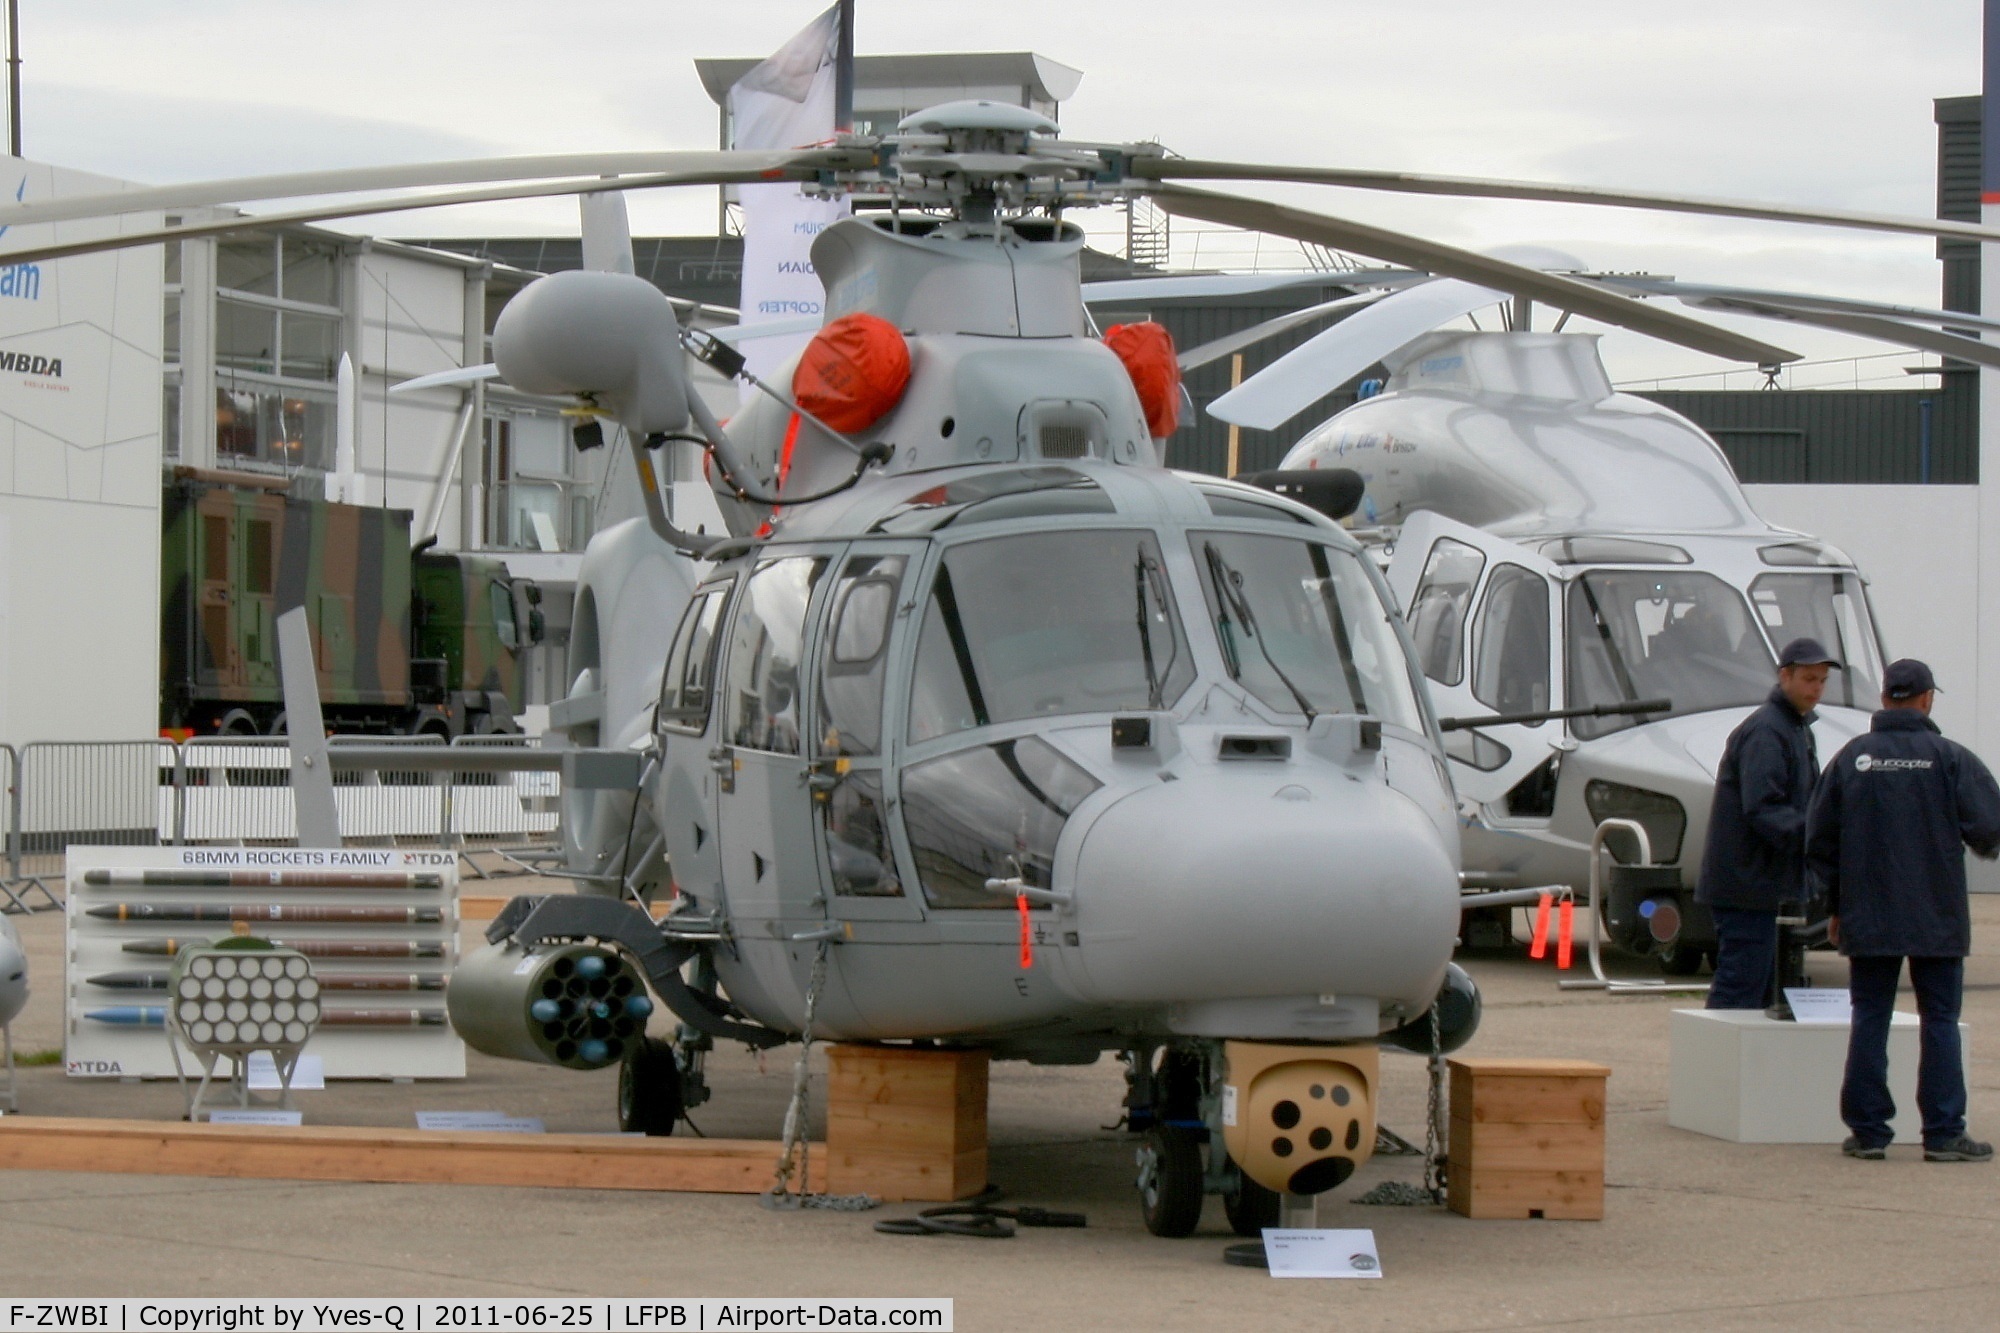 F-ZWBI, Eurocopter AS-565MB Panther C/N 6866, Eurocopter AS-565MB Panther for Bulgarian Navy, Static Display, Paris Le Bourget (LFPB-LBG) Air Show 2011